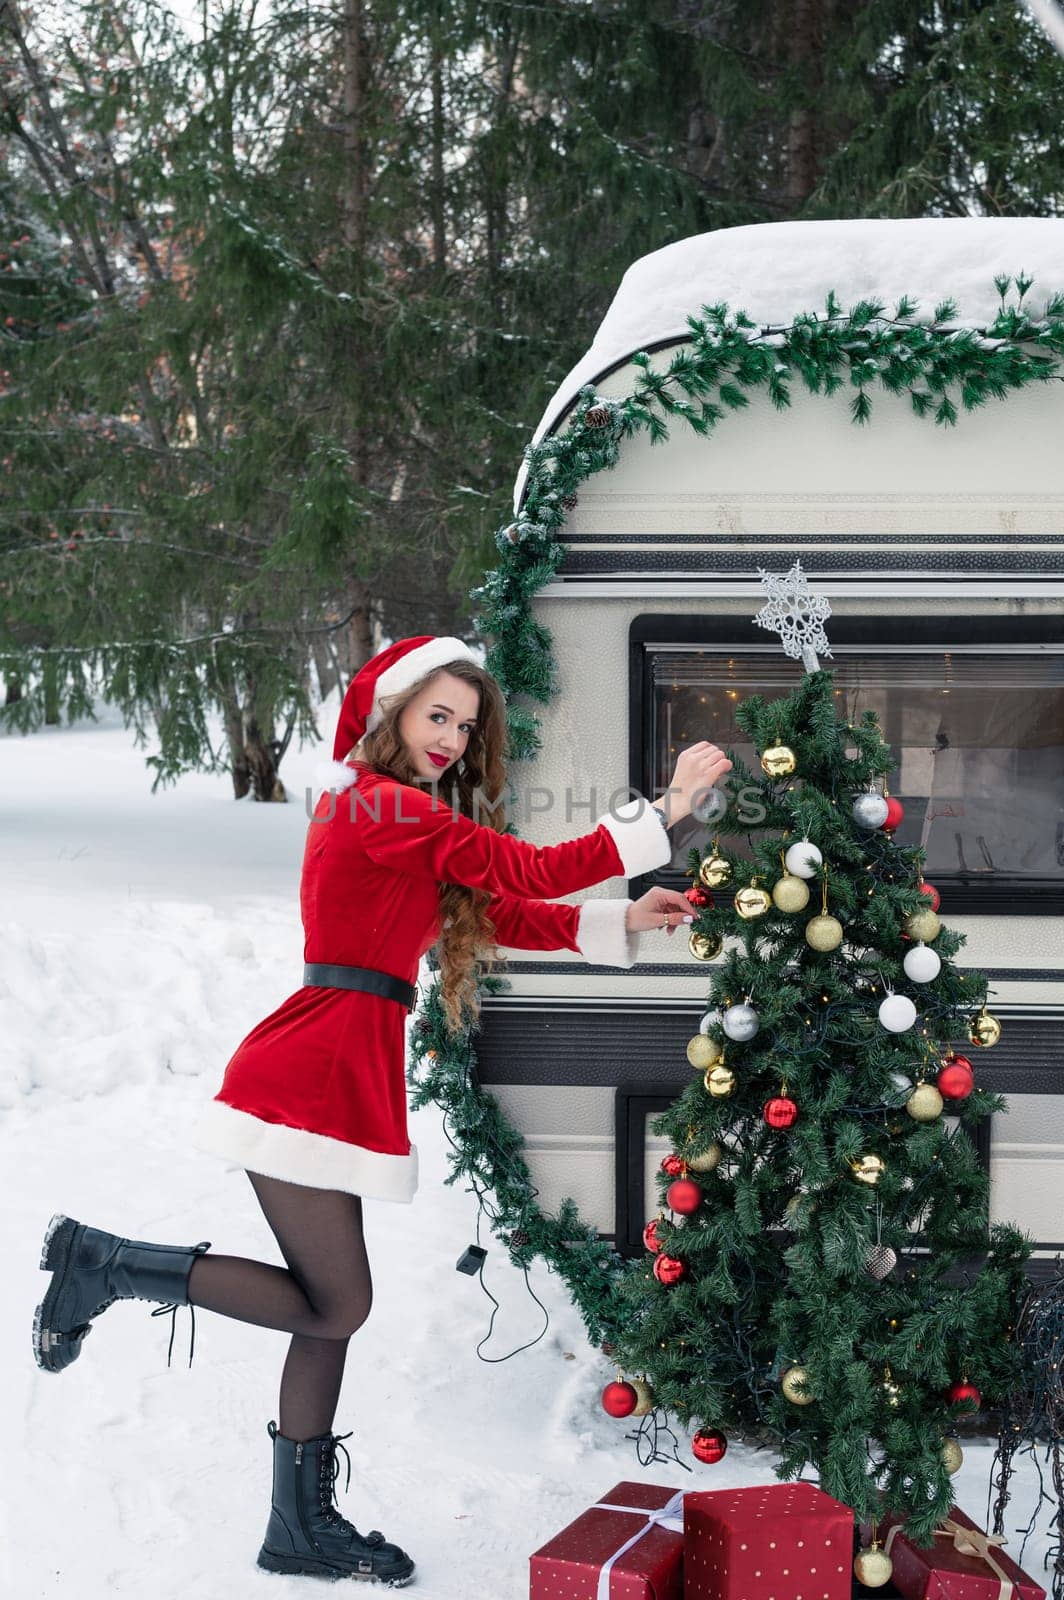 Young woman in santa costume decorates the Christmas tree at winter campsite getting ready for the new year. New year celebration concept